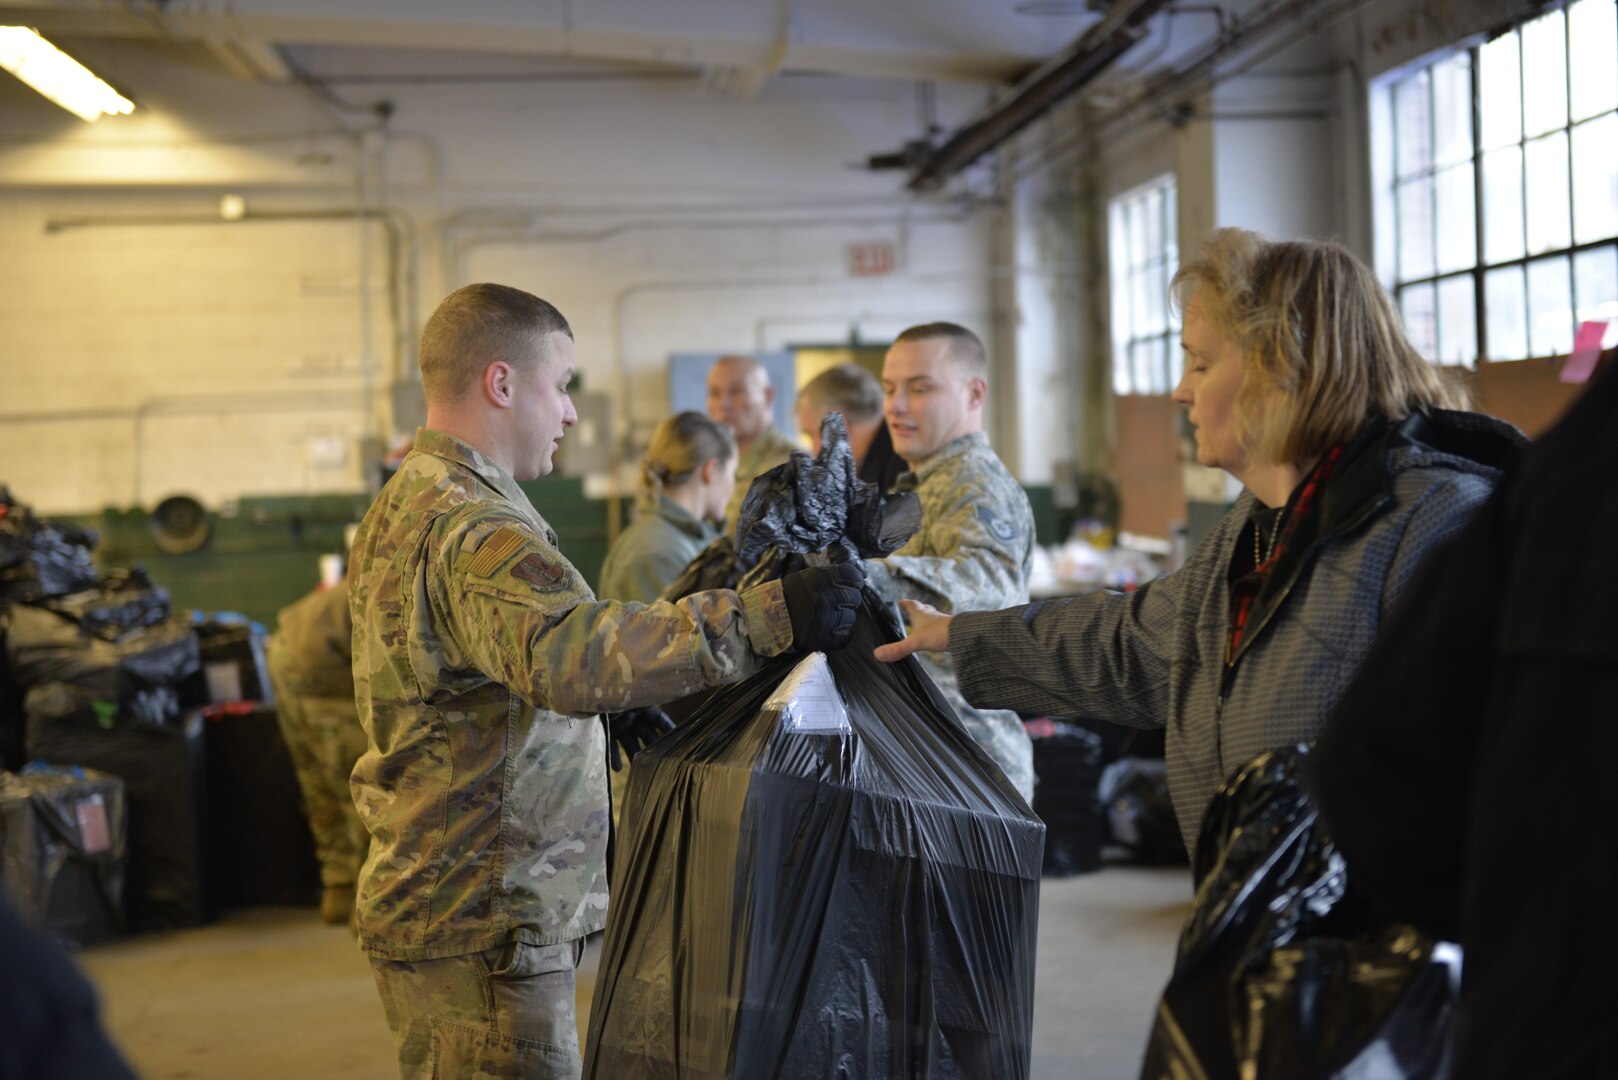 Brothers Tech. Sgt. Sean Wood and Staff Sgt. Christopher Wood, with the N.H. Air National Guard, help load donated Christmas gifts as part of Operation Santa Claus on Dec. 16 in Concord. Volunteers from the State Employees' Association, SEIU Local 1984, partner with N.H. guardsmen annually to transport presents to distribution points throughout the state. The program has been led by the SEA since 1960, and ensures gifts are provided to thousands of NH children in need. (U.S. Air National Guard photo by Tech. Sgt. Aaron Vezeau)